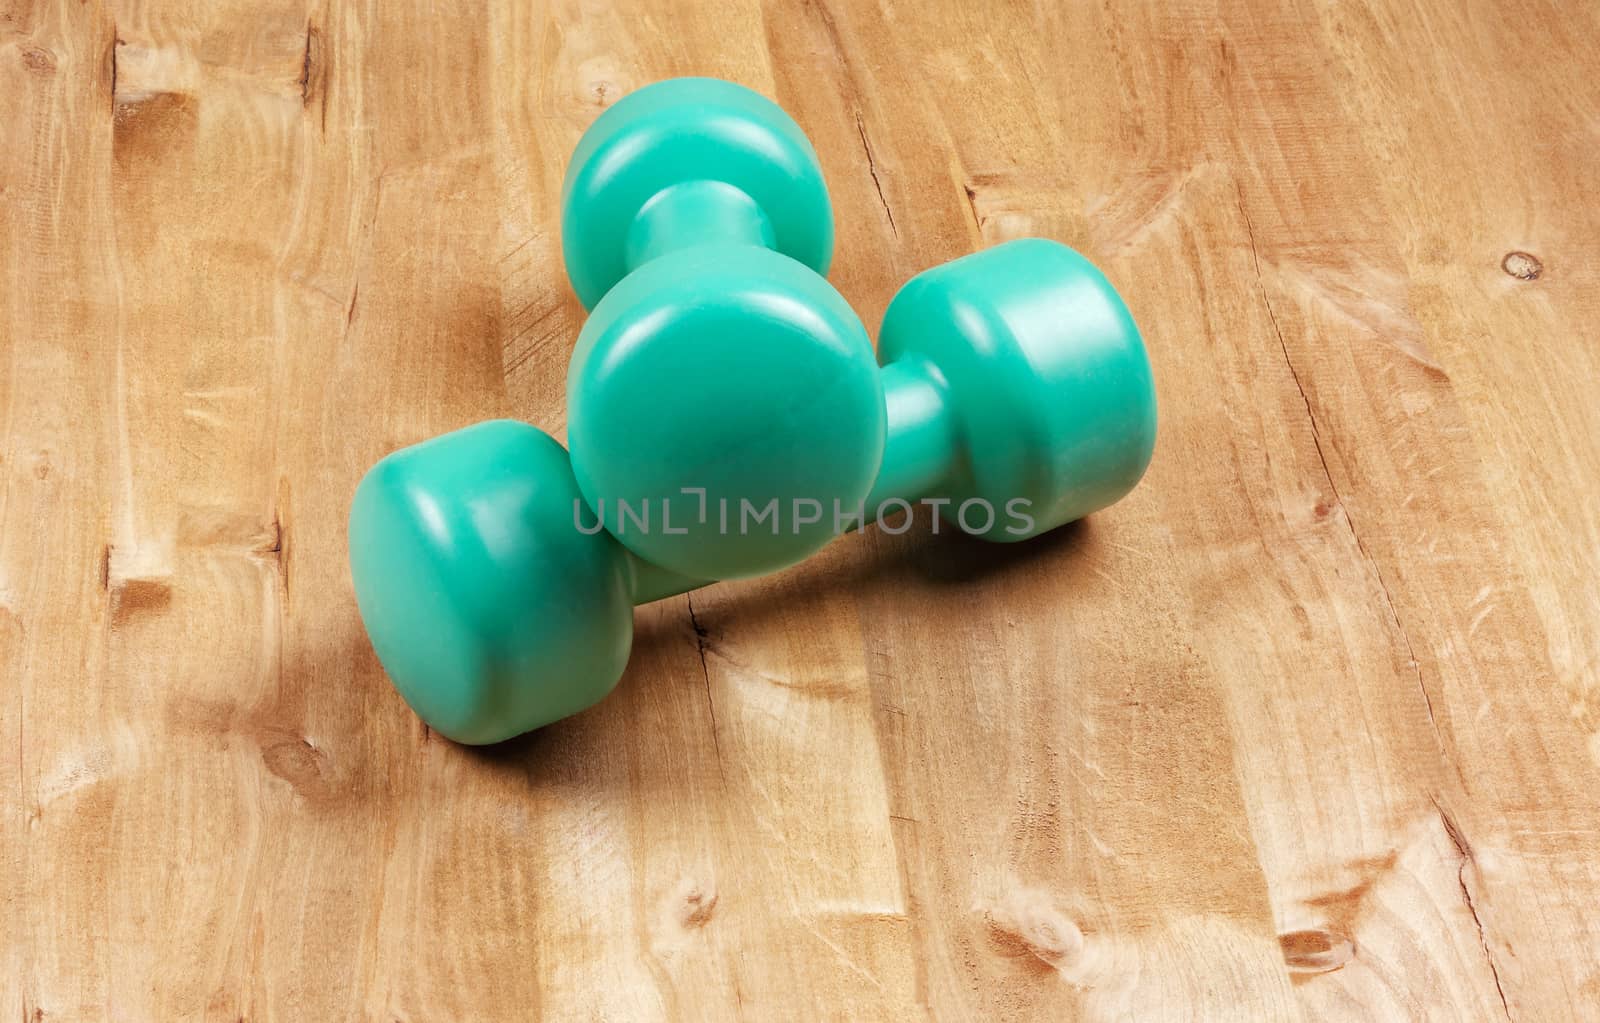 Two dumbbells for playing sports lie on a wooden surface